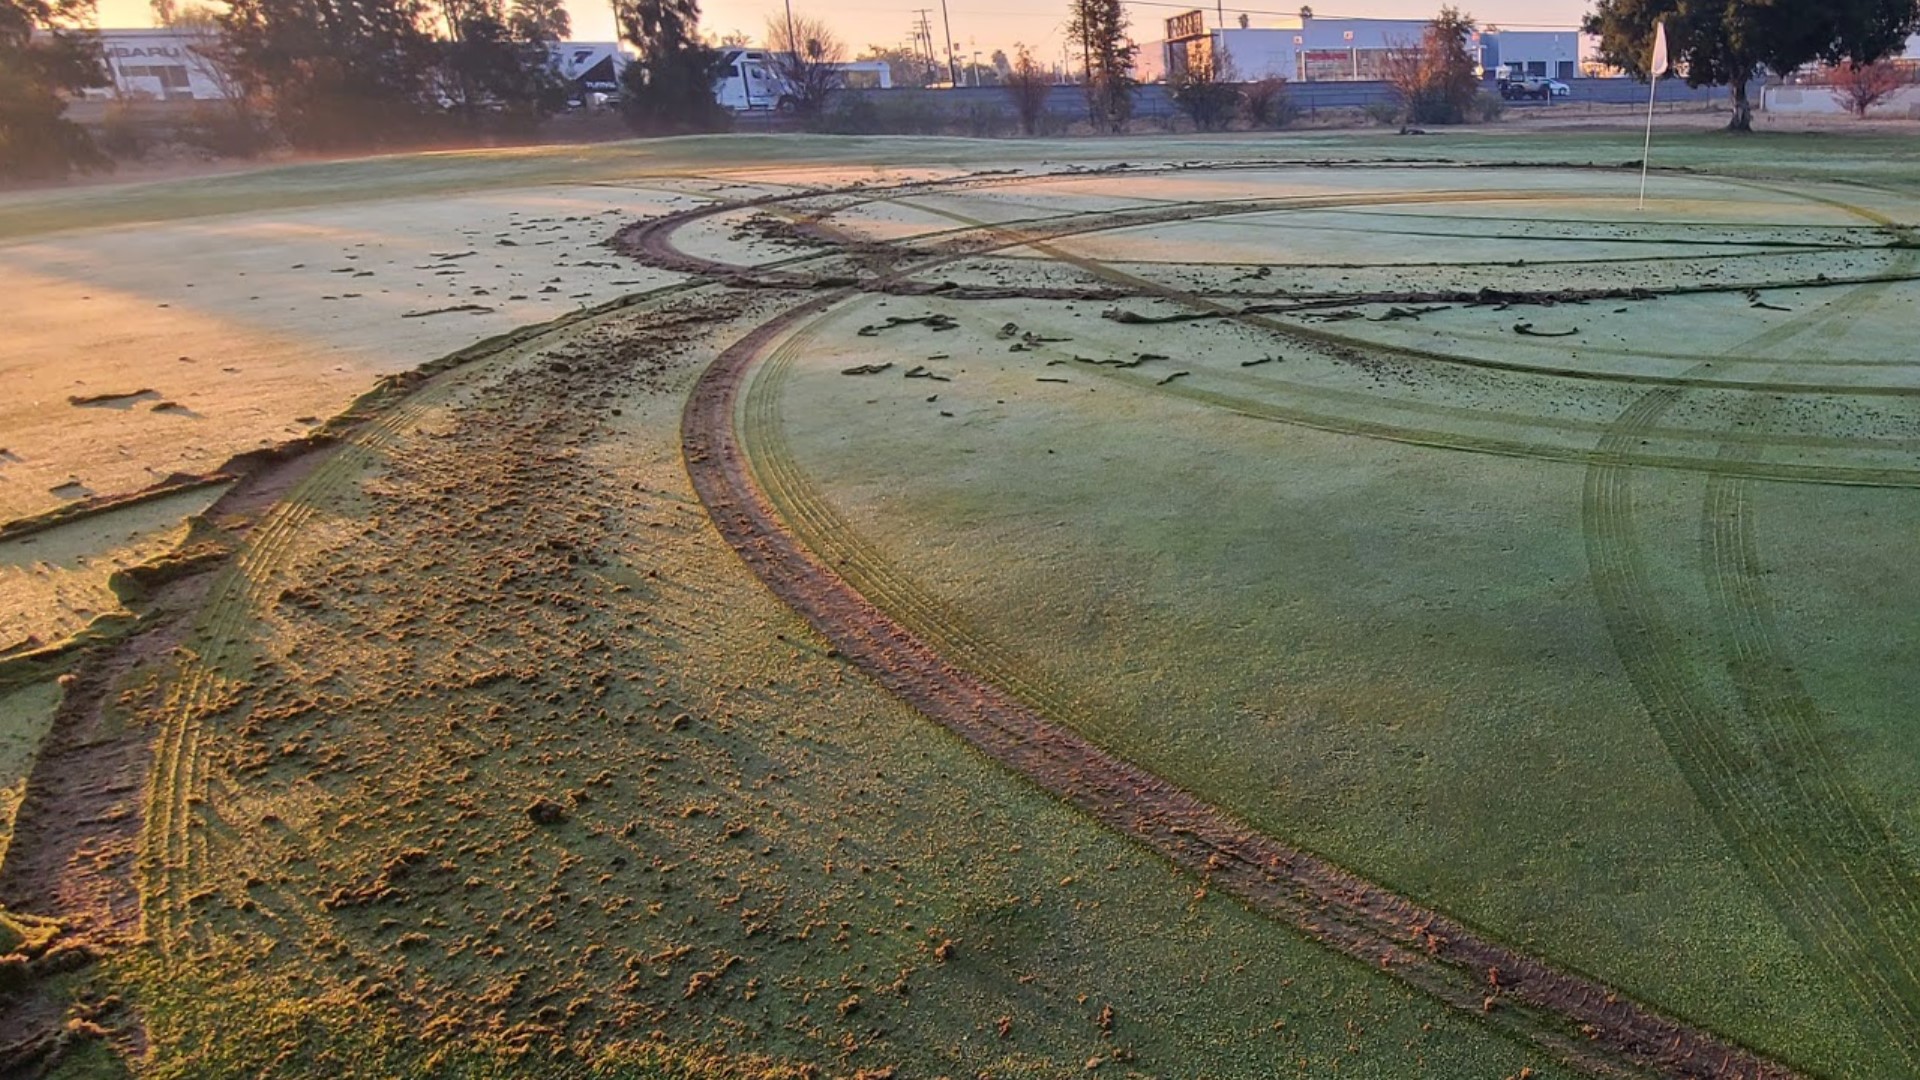 Haggin Oaks Golf Complex was vandalized on Sunday when someone drove over the majority of the greens, leaving ripped up grass and tire marks across the course.